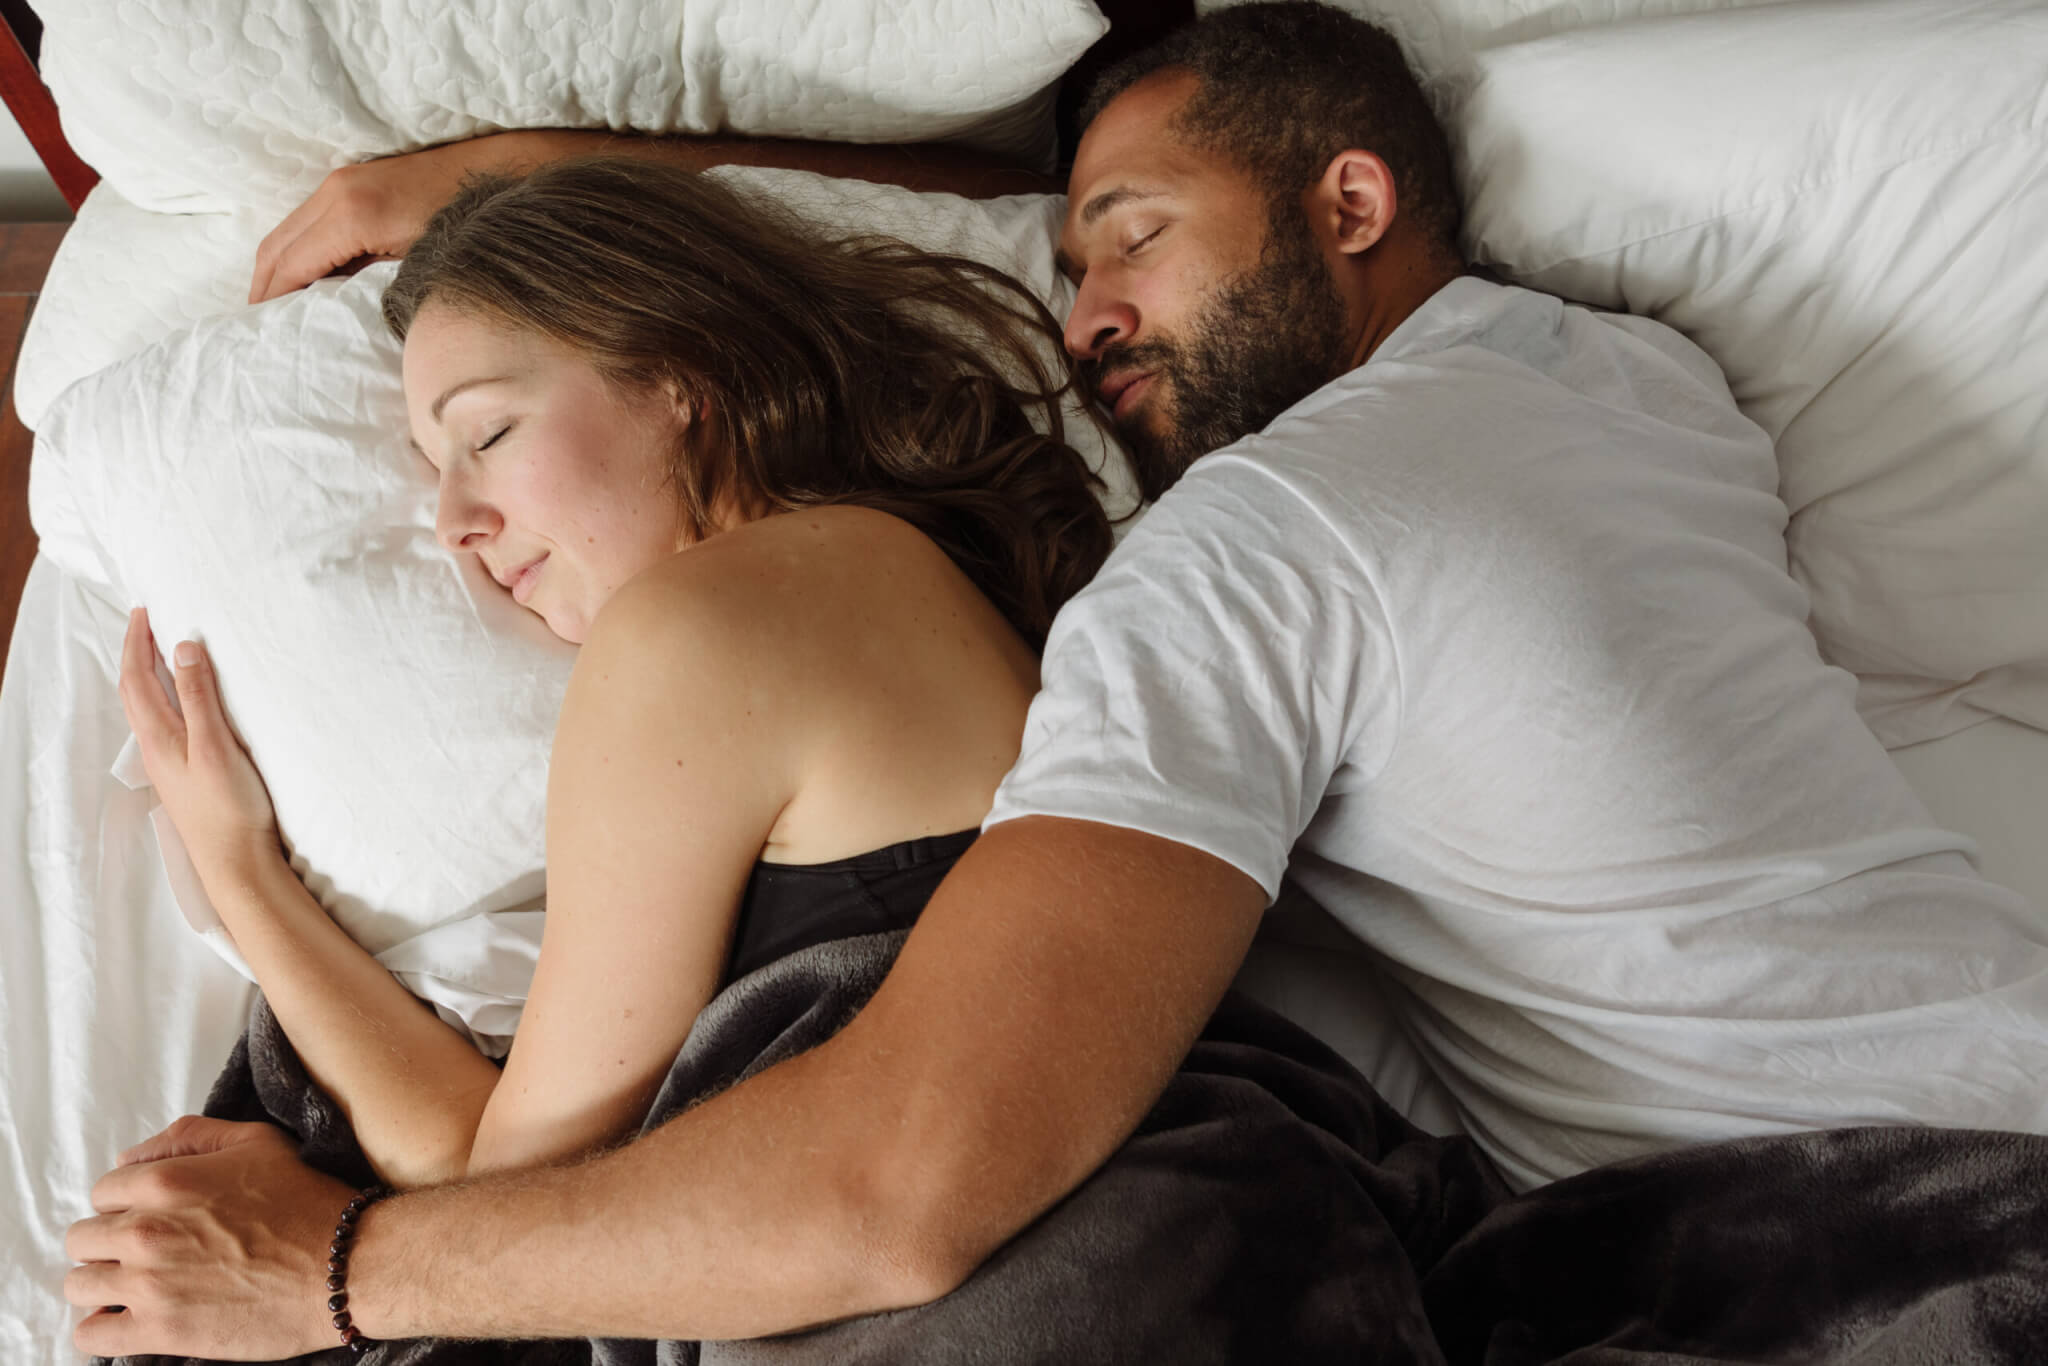 Sleeping with Love: How Sleeping With A Partner Helps